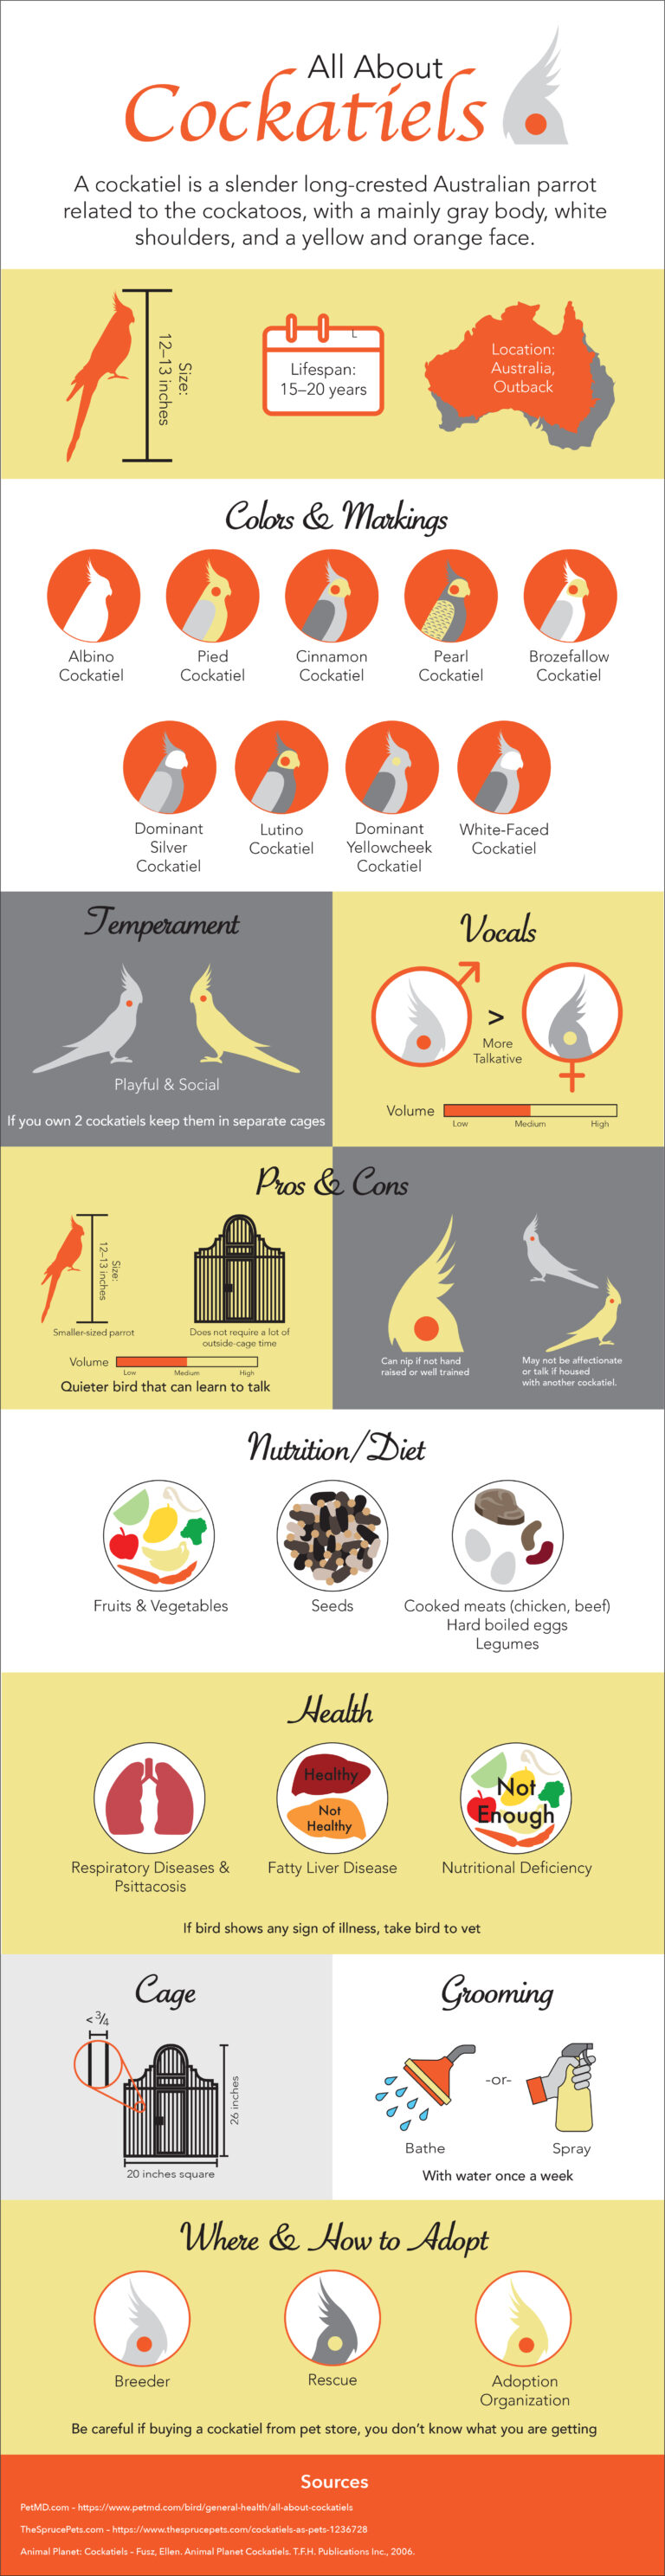 "All About Cockatiels" Infographic Final Version